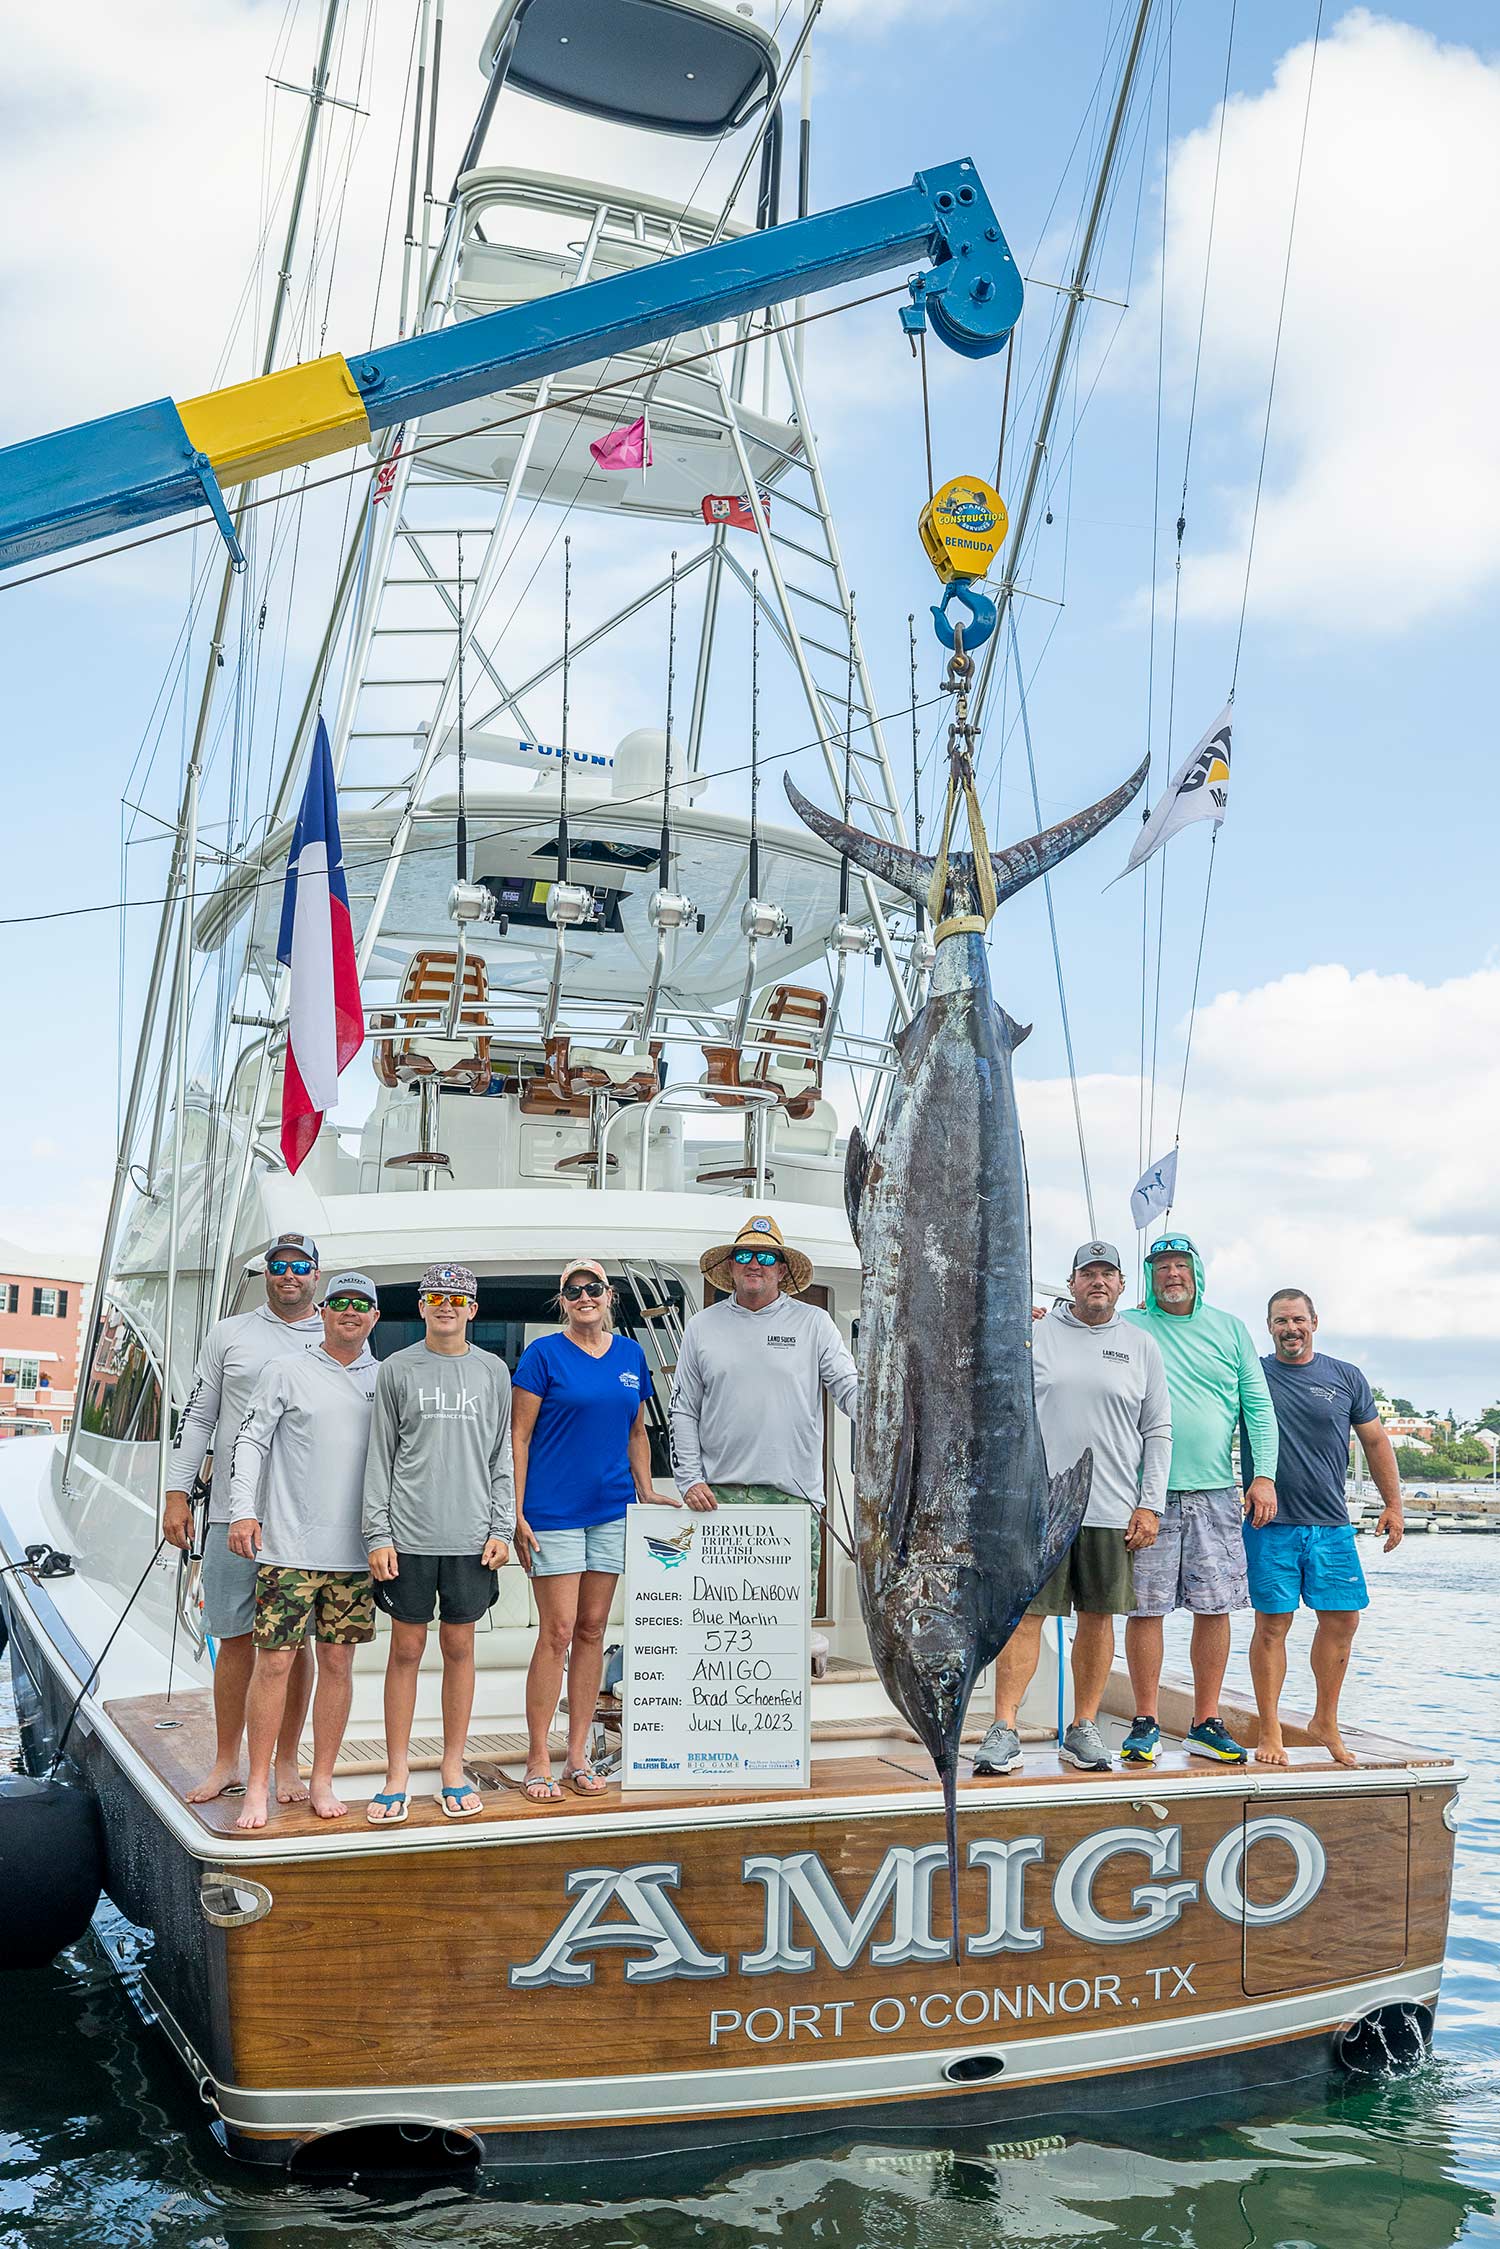 A sport-fishing team stands on the cockpit of a boat named 'Amigo', next to their Largest Marlin catch.